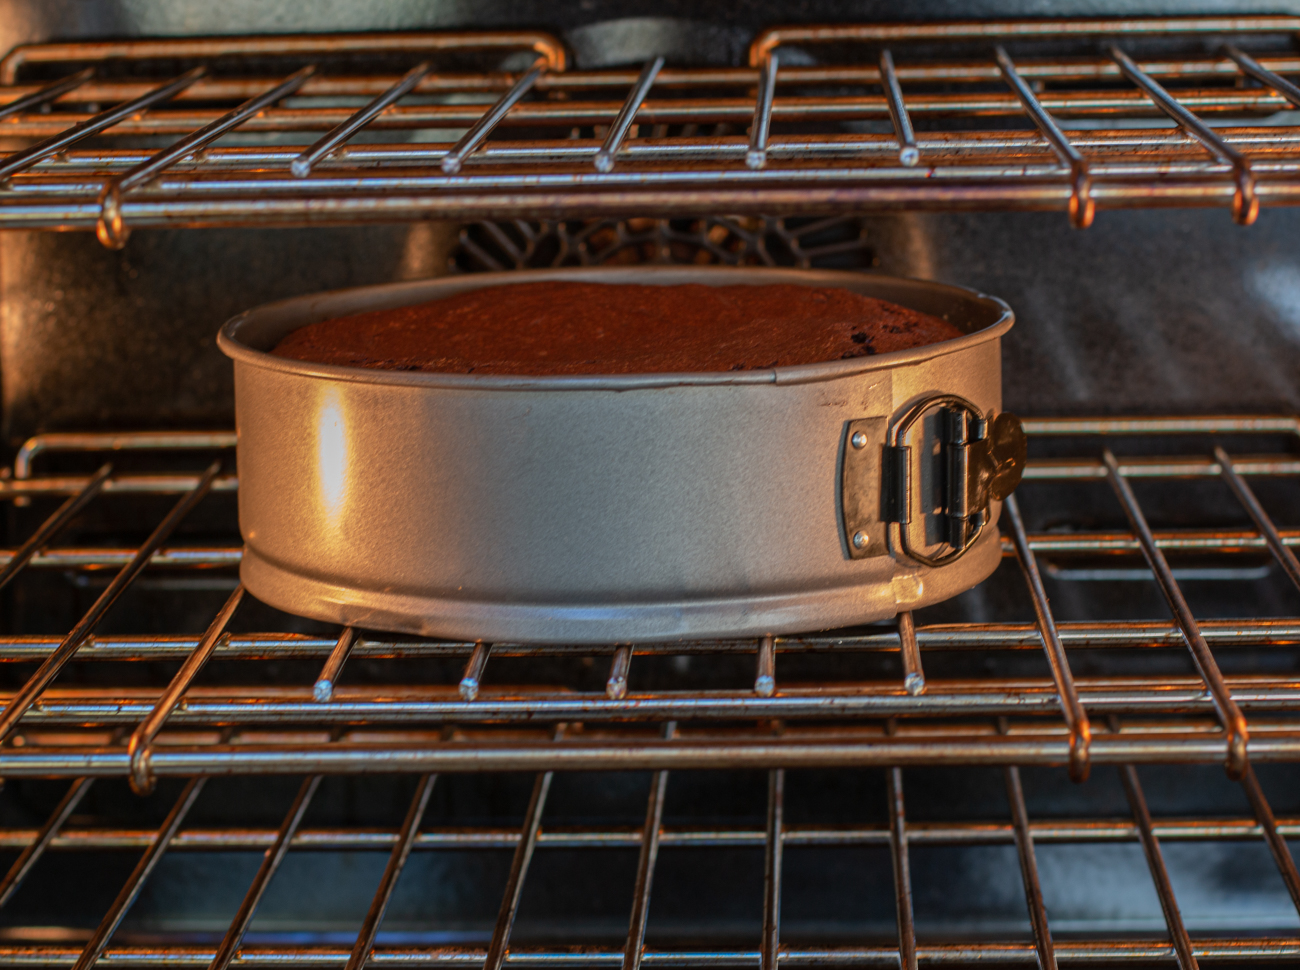 The cake baking - 22 minutes at 350 degrees (I use a convection-bake)